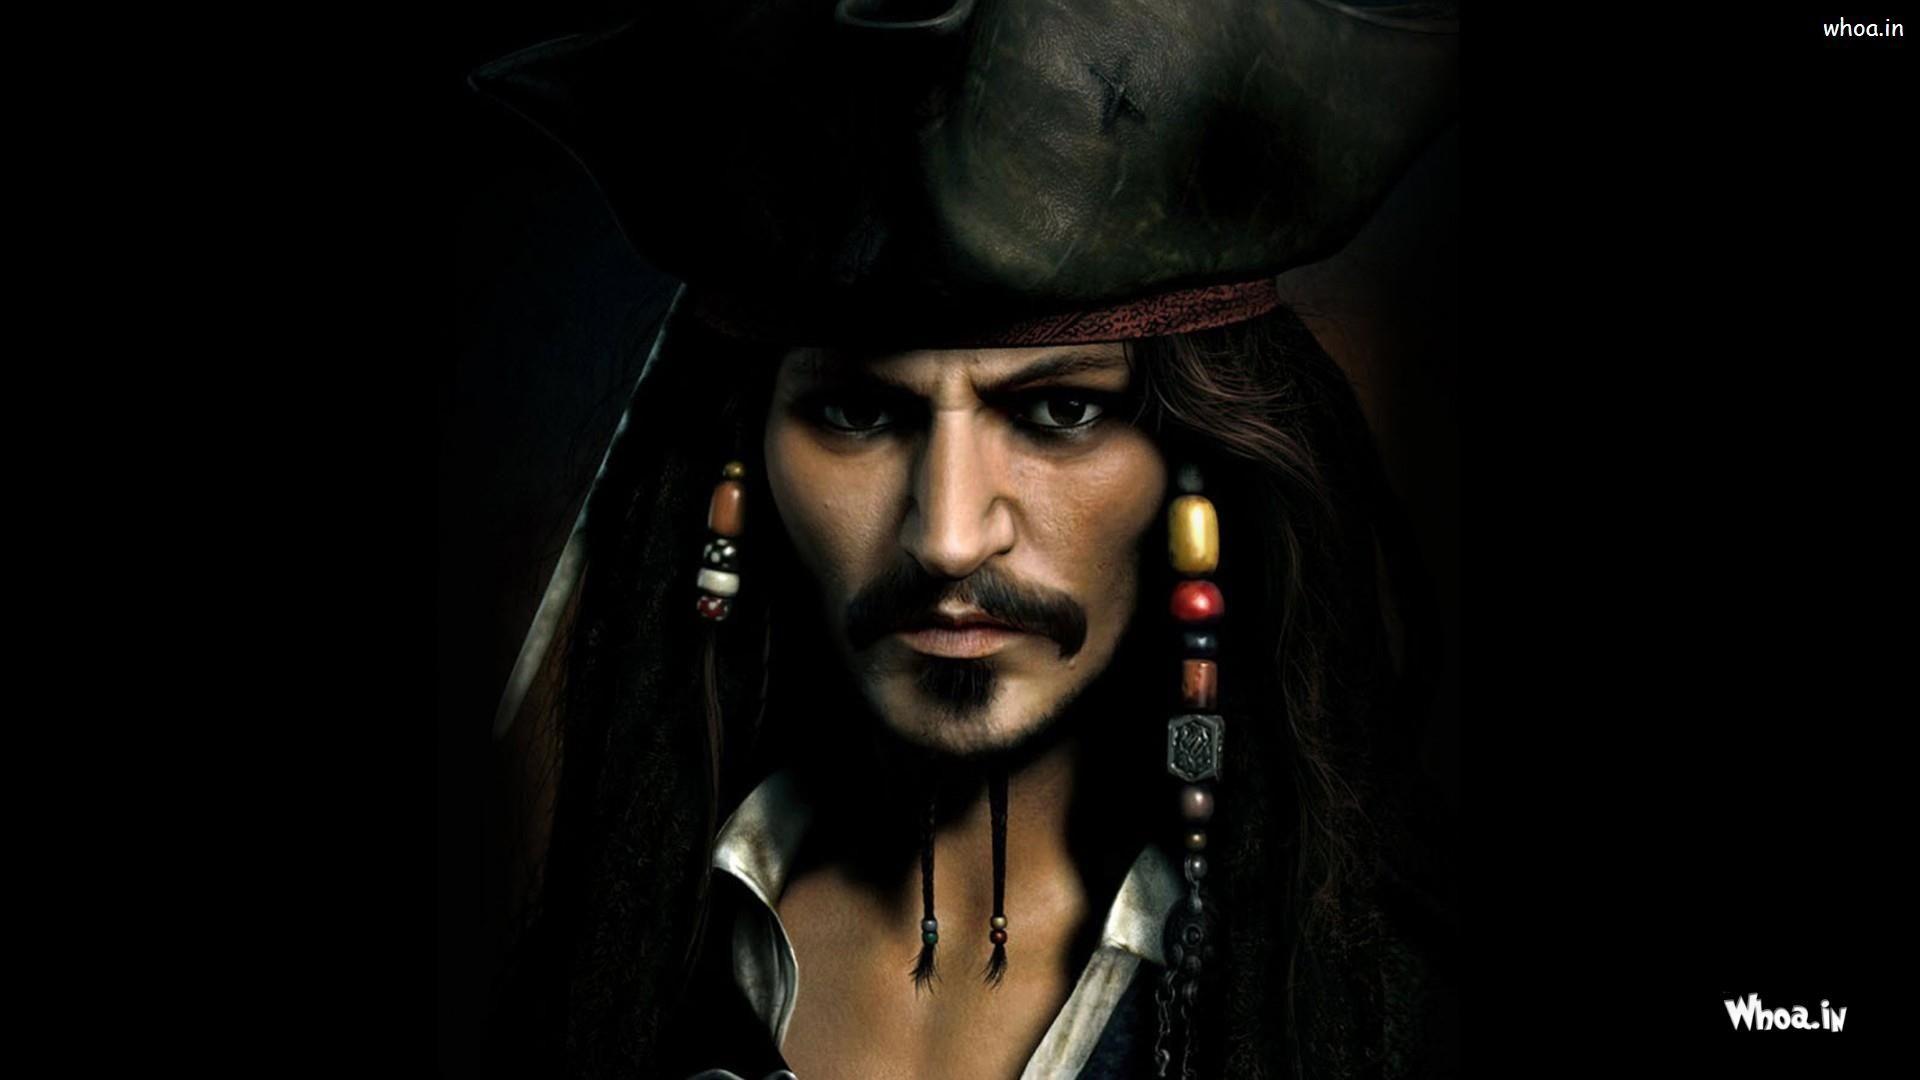 Jack Sparrow As Johnny Depp In Pirate Of Caribbean HD Wallpaper